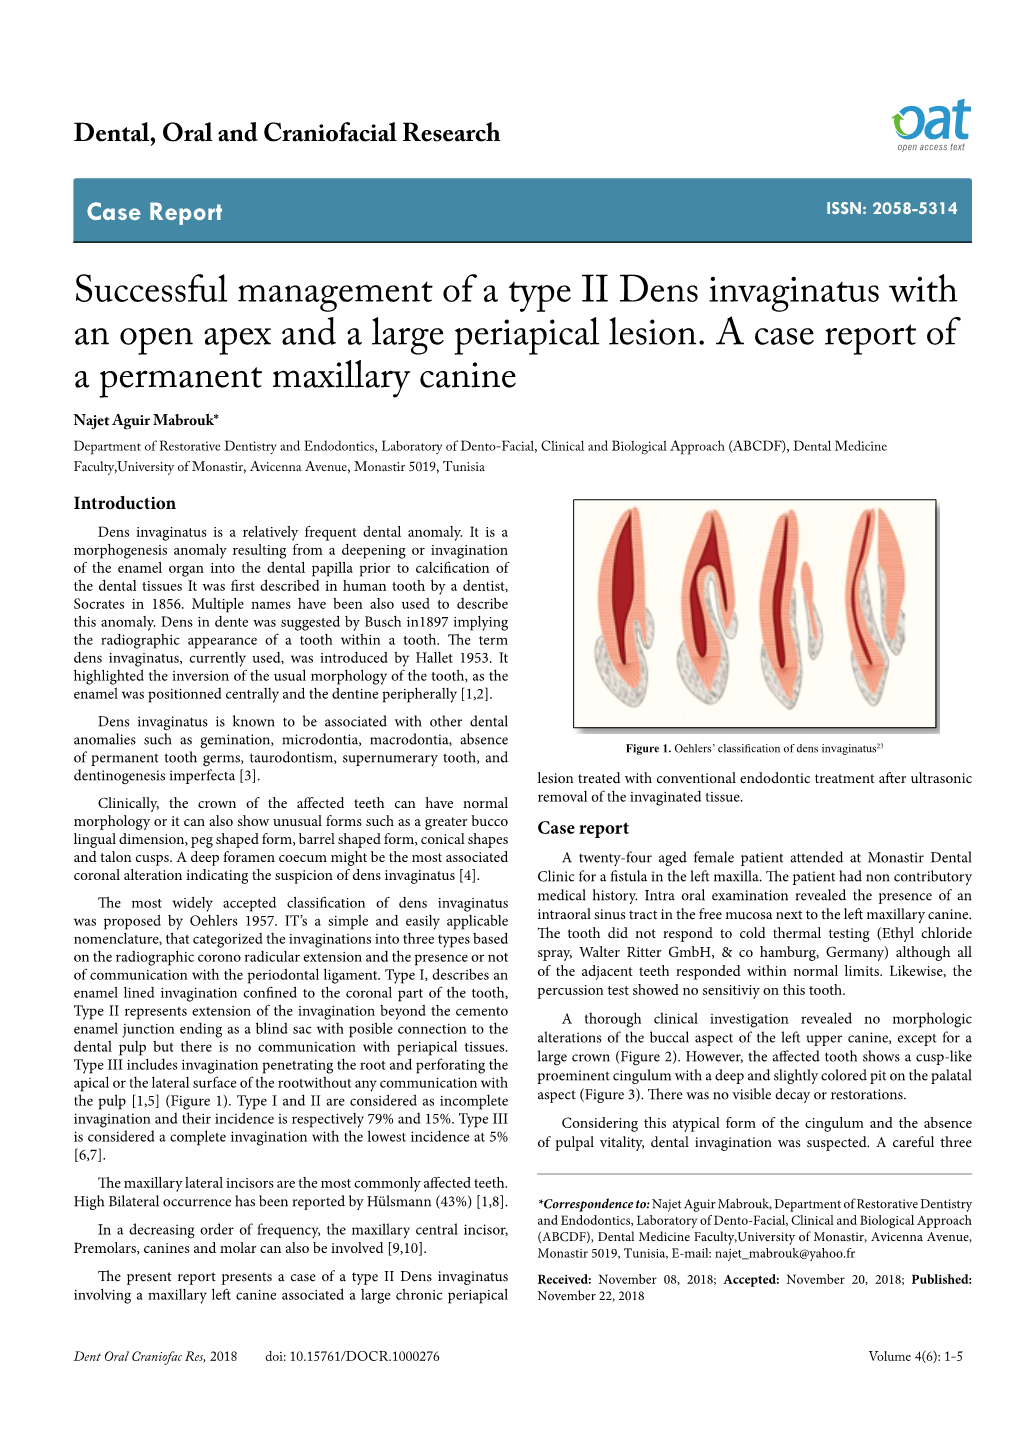 Successful Management of a Type II Dens Invaginatus with an Open Apex and a Large Periapical Lesion. a Case Report of a Permanen